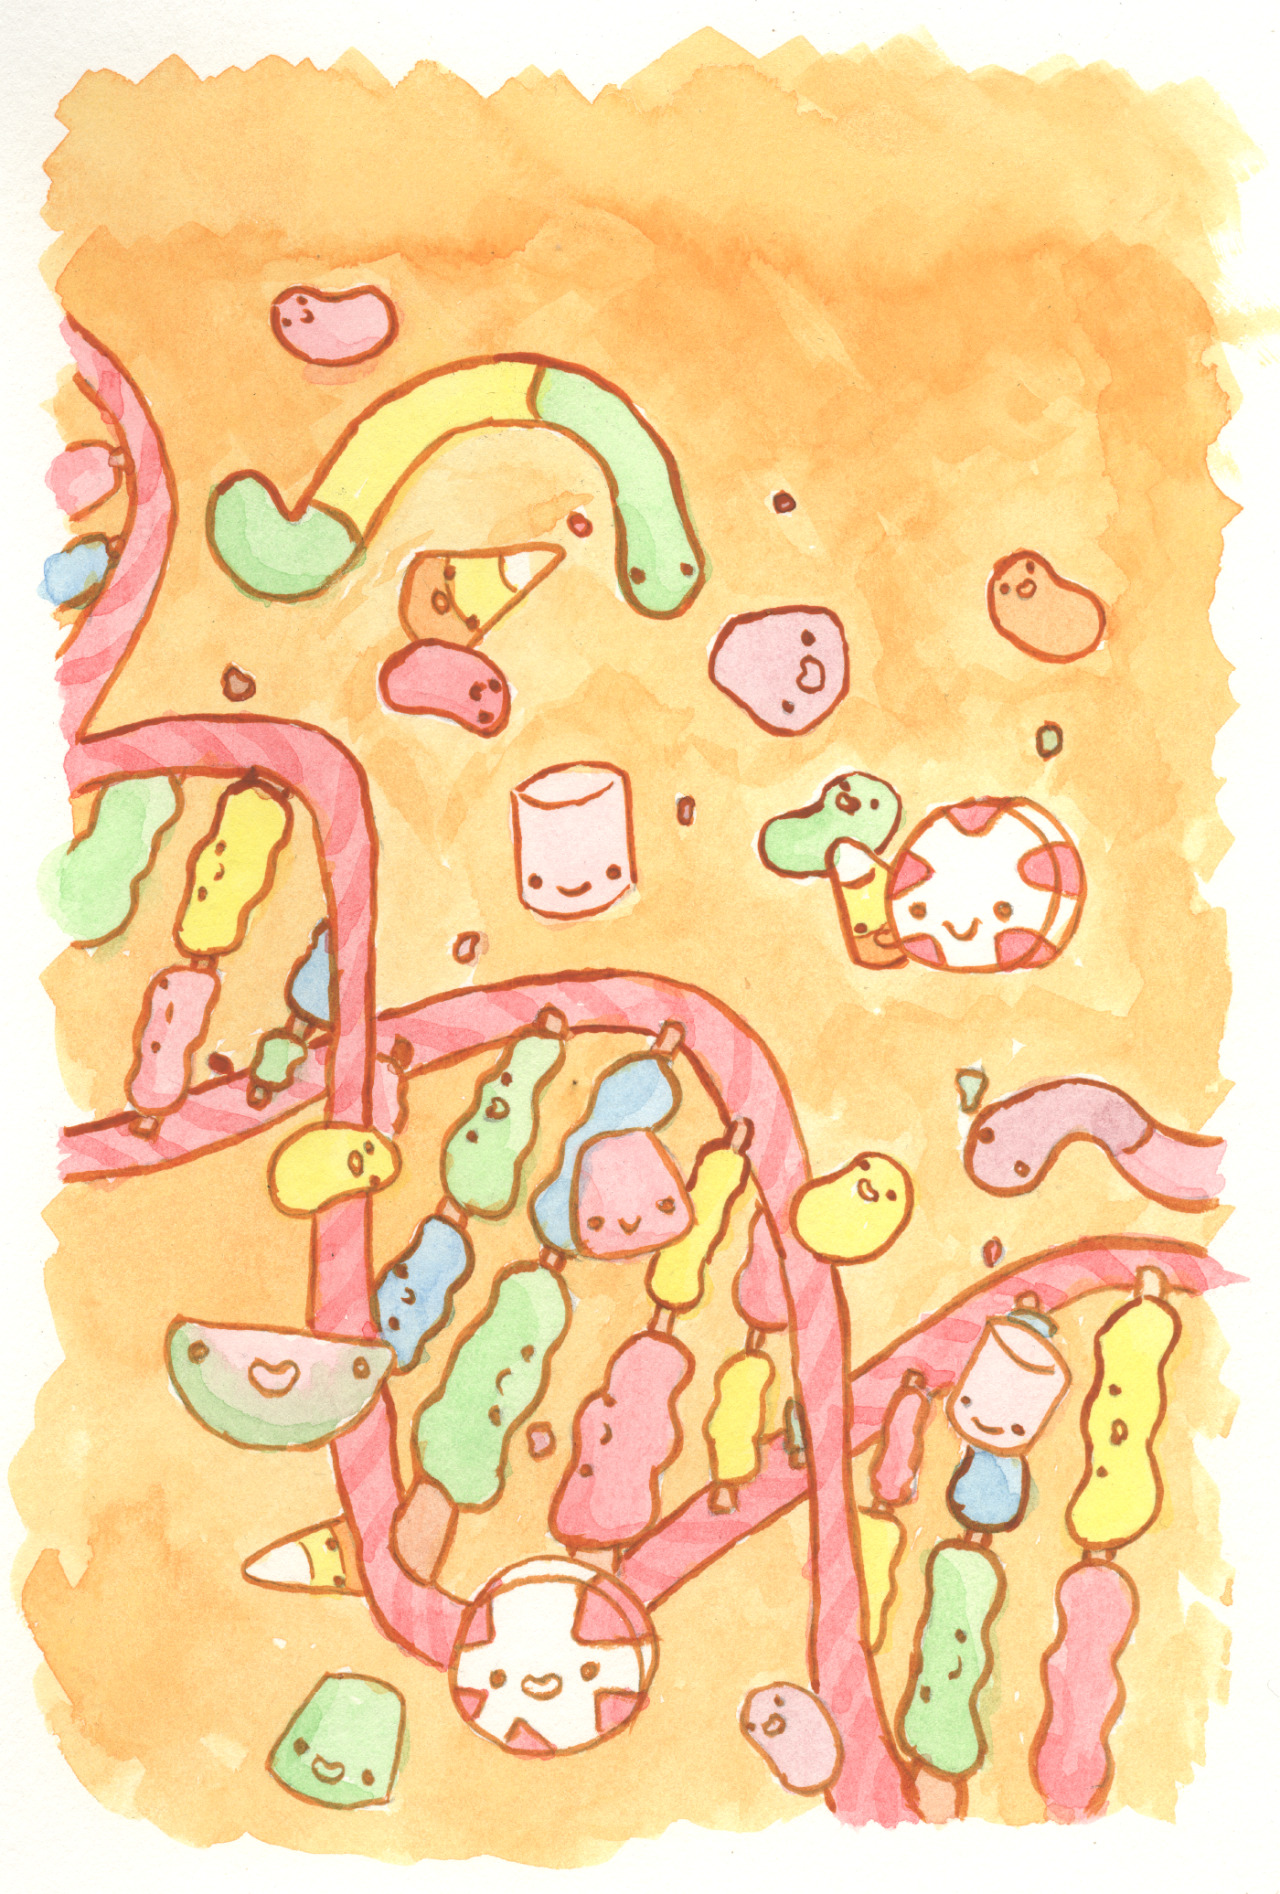 mansfieldnstuff:  Candy DNA  I did this cover for a kids book written by kids called